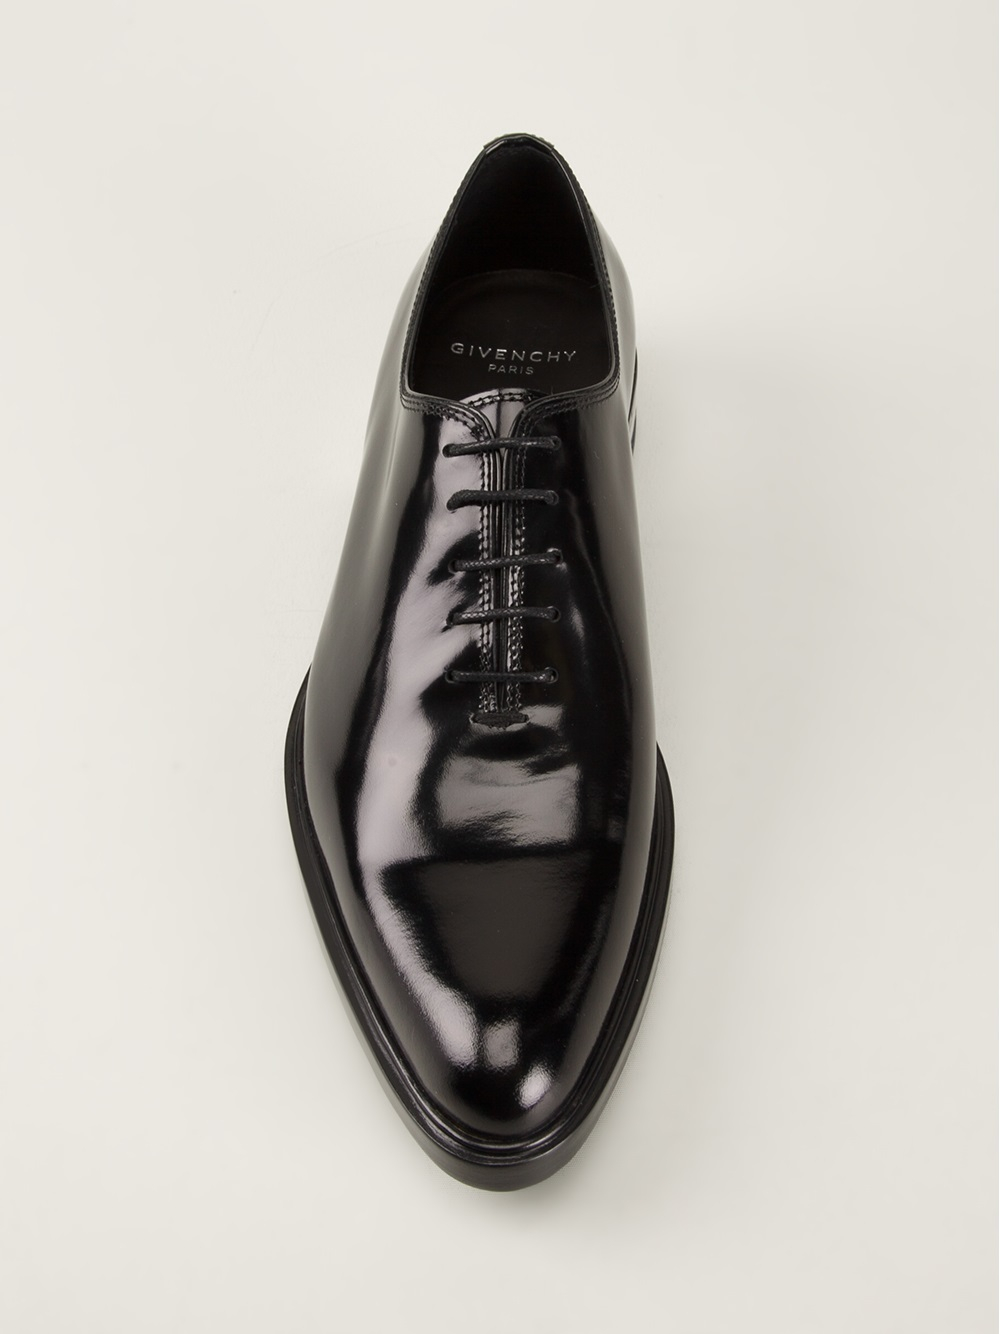 Lyst - Givenchy Richelieu Shoes in Black for Men